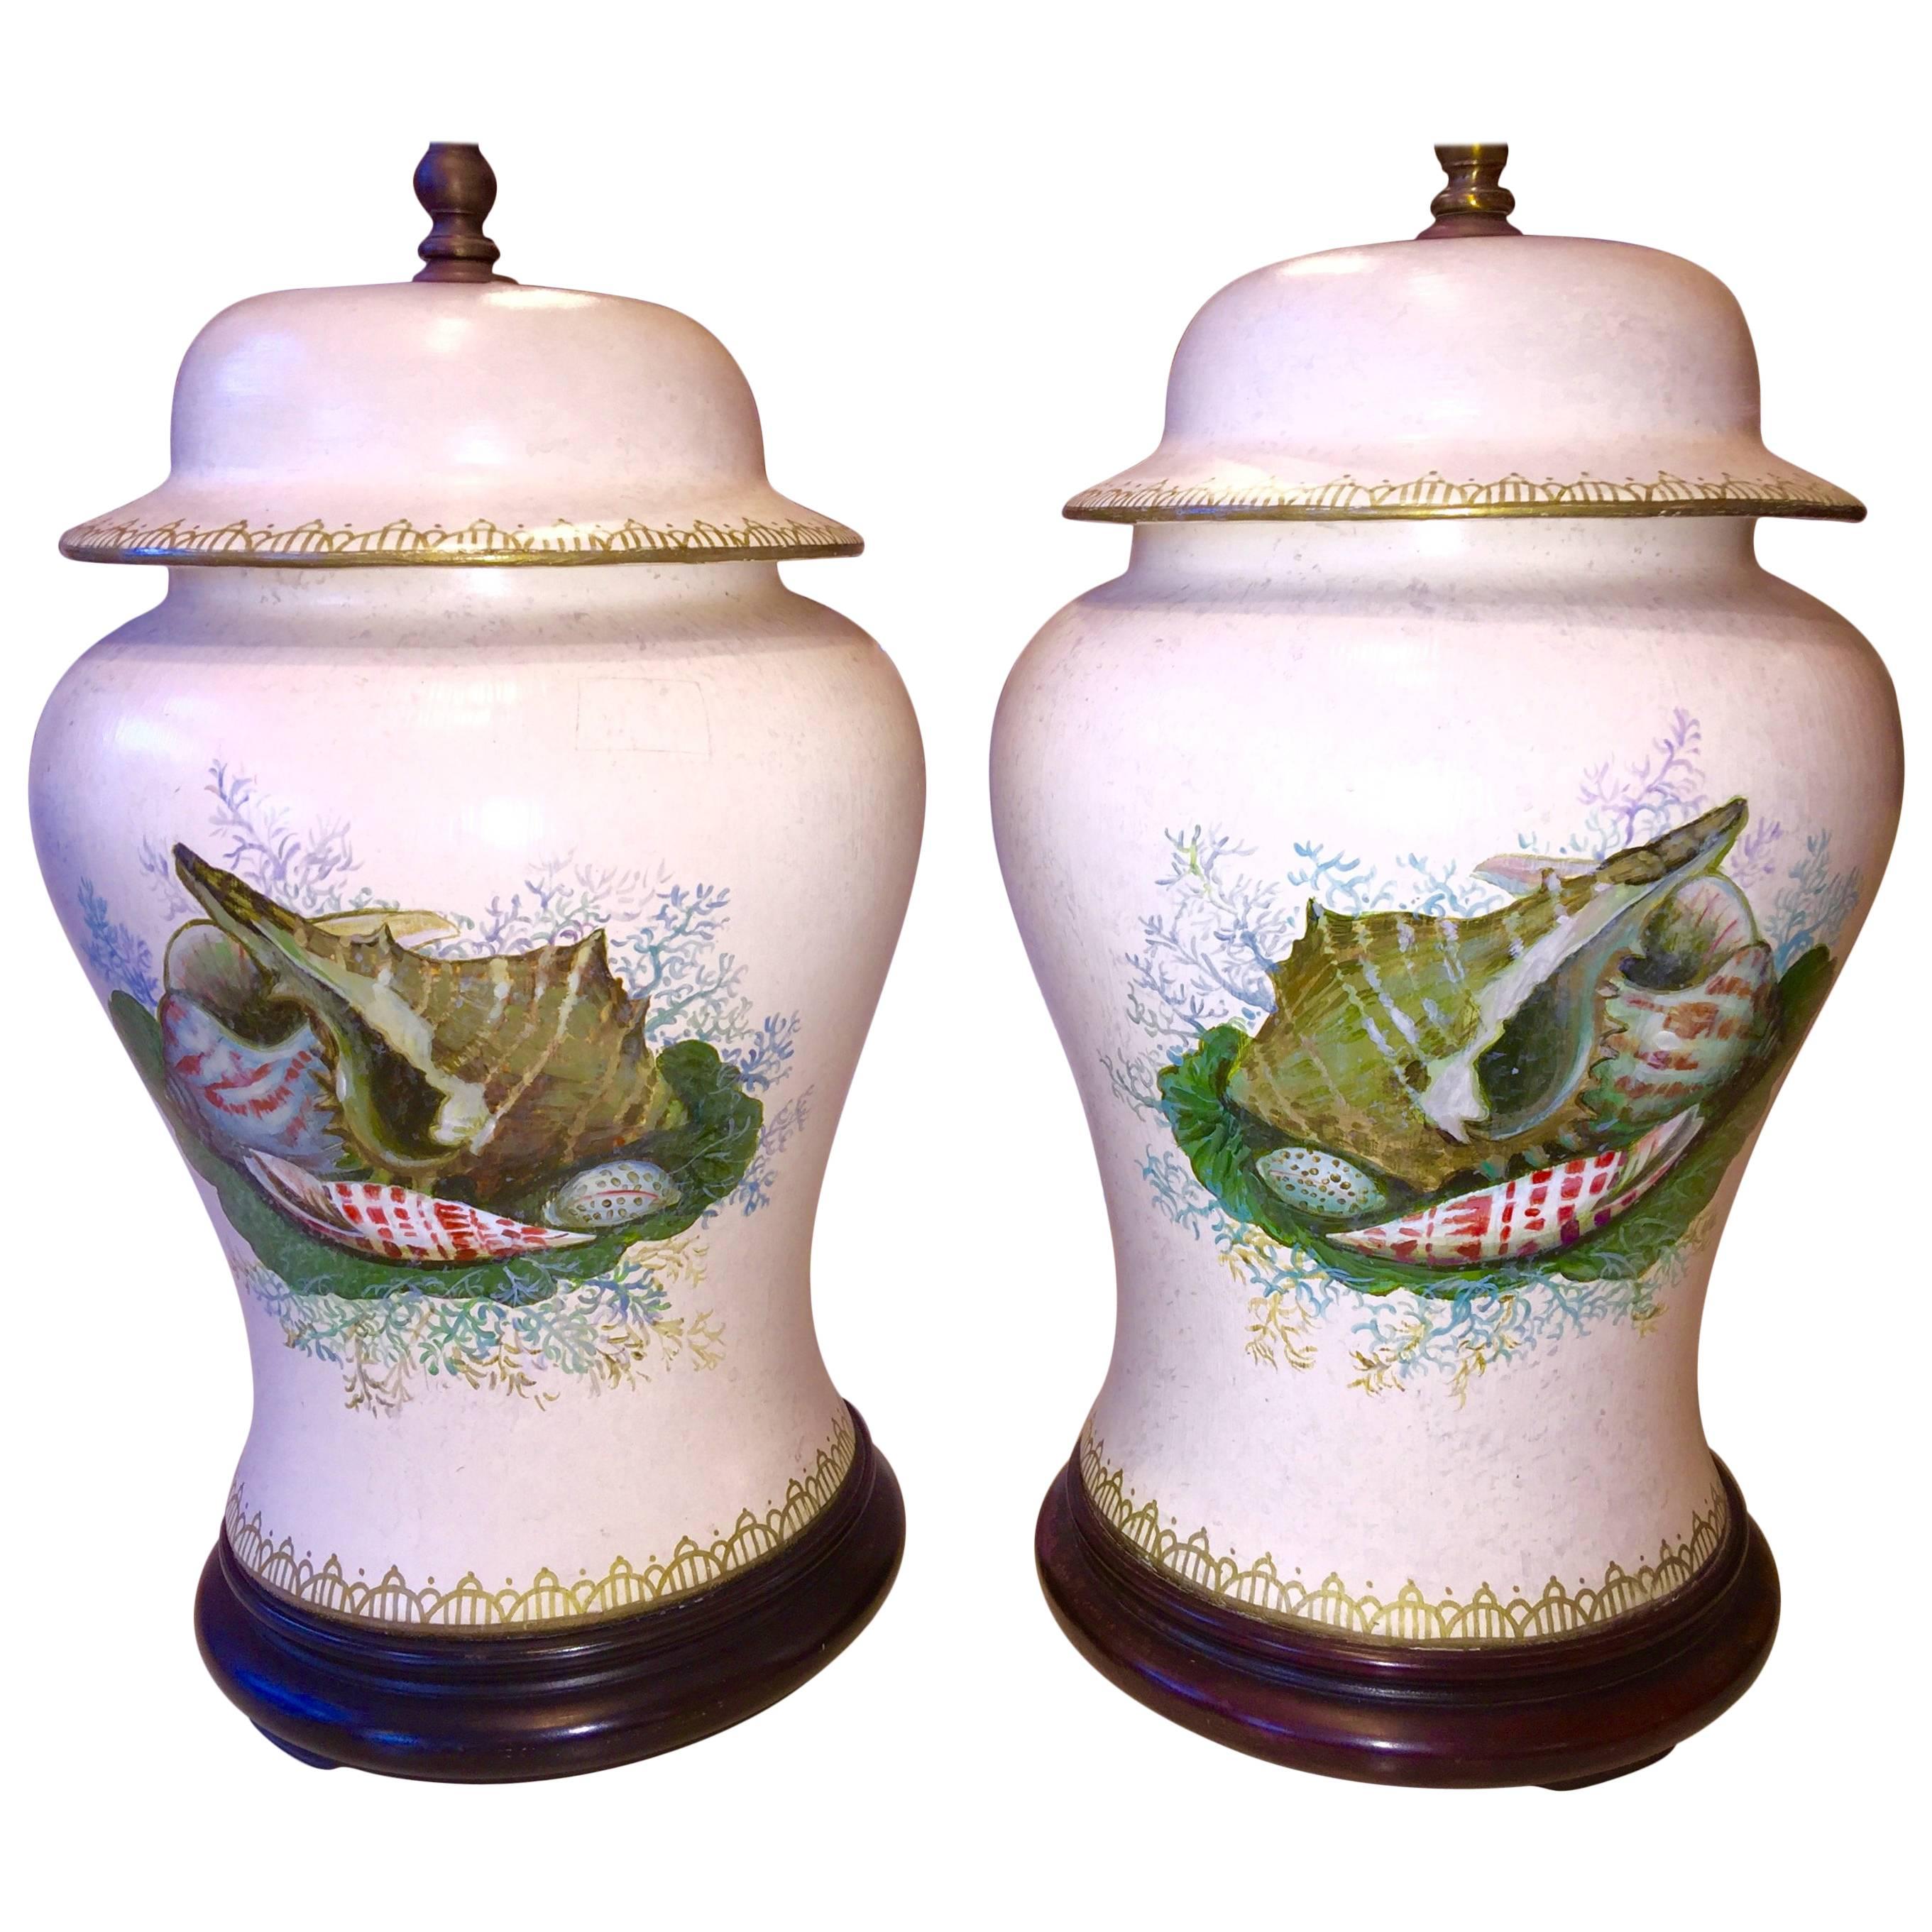 Pair of American Hand-Painted with Shells Porcelain Temple Jar Lamps